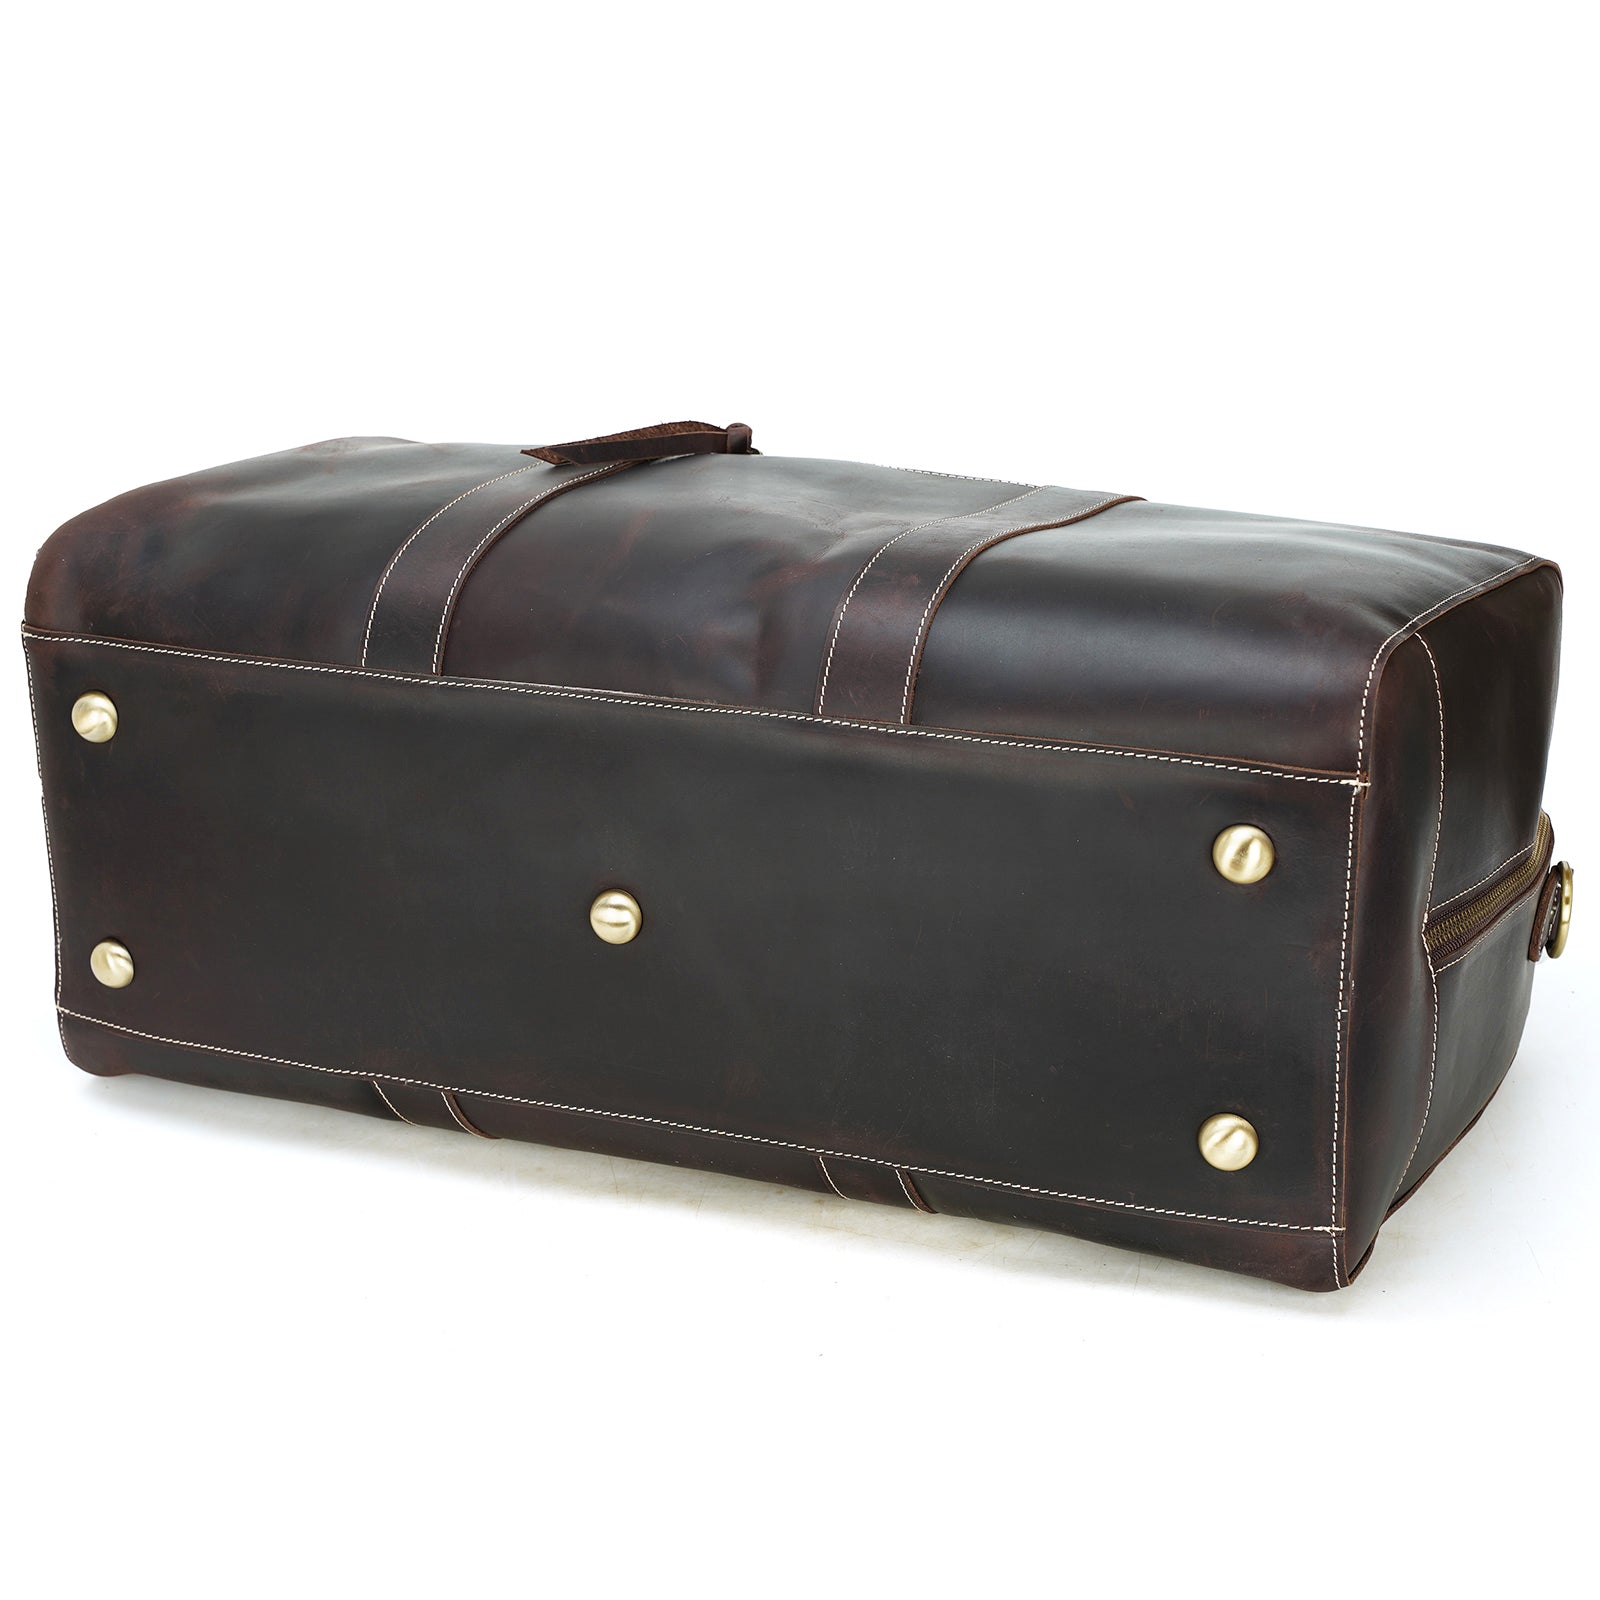 Men's Pu Leather Holdall Hand Luggage Weekend Duffel Travel